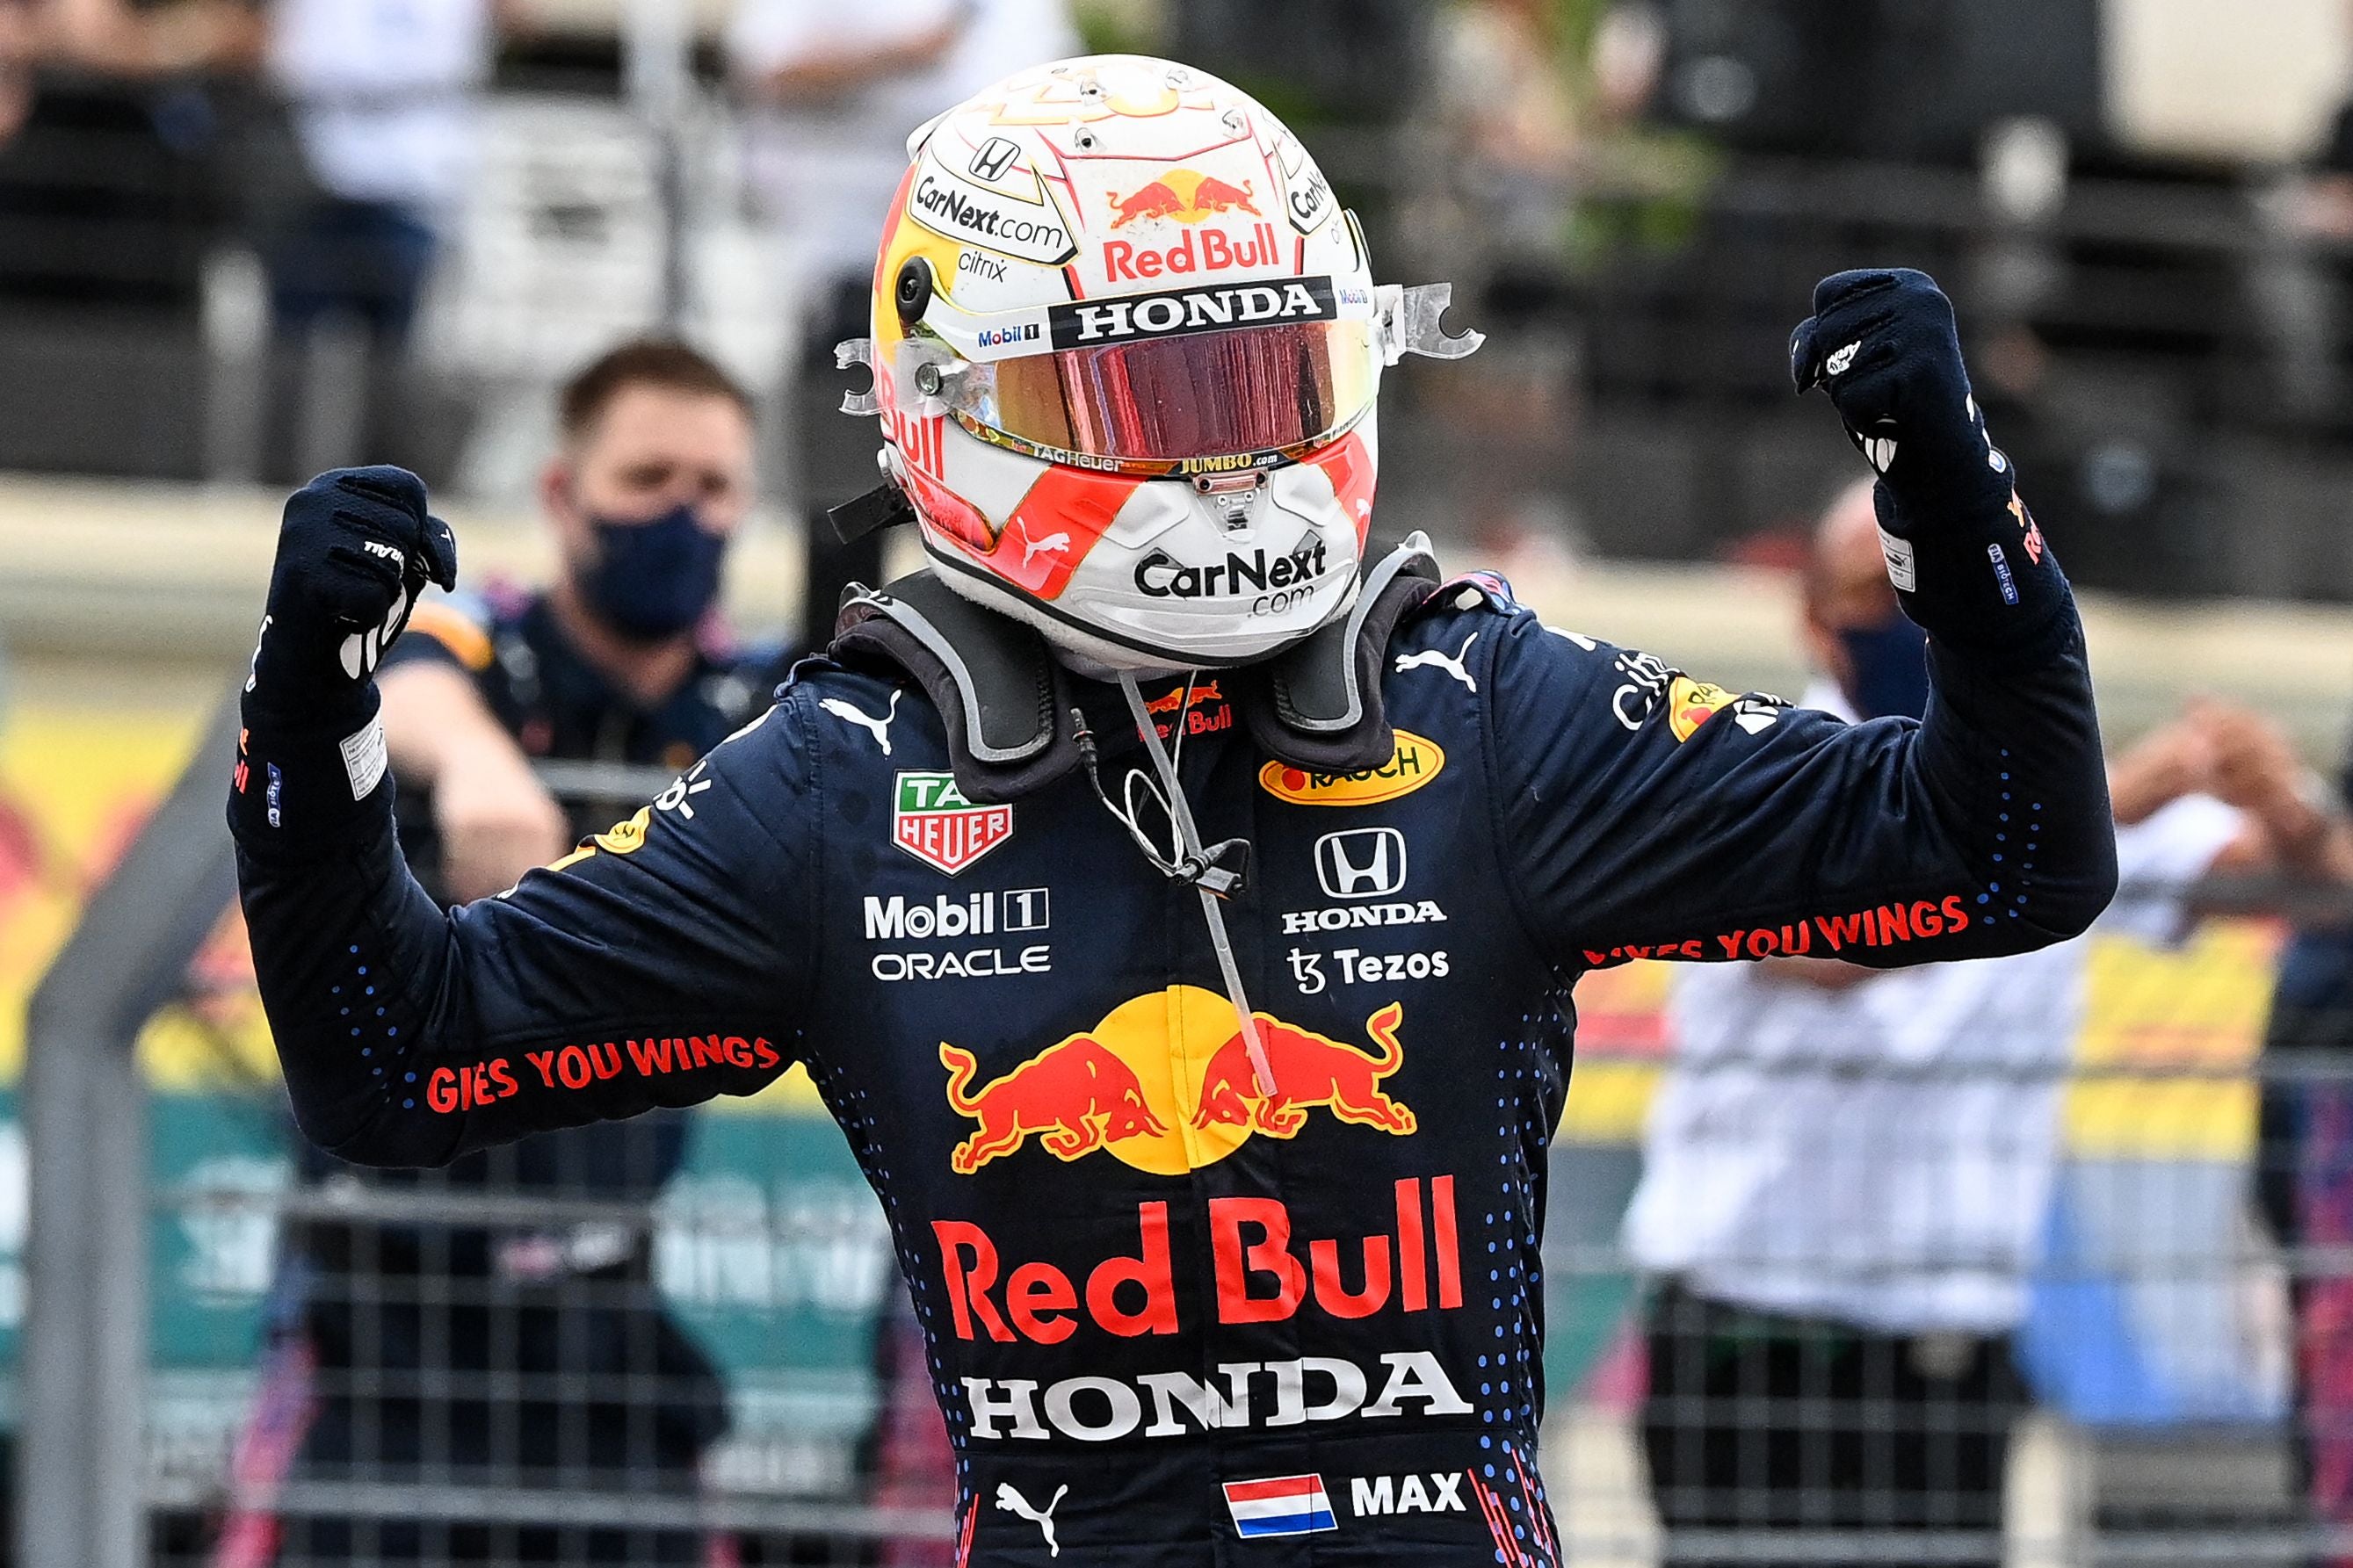 Max Verstappen won the 2021 French Grand Prix